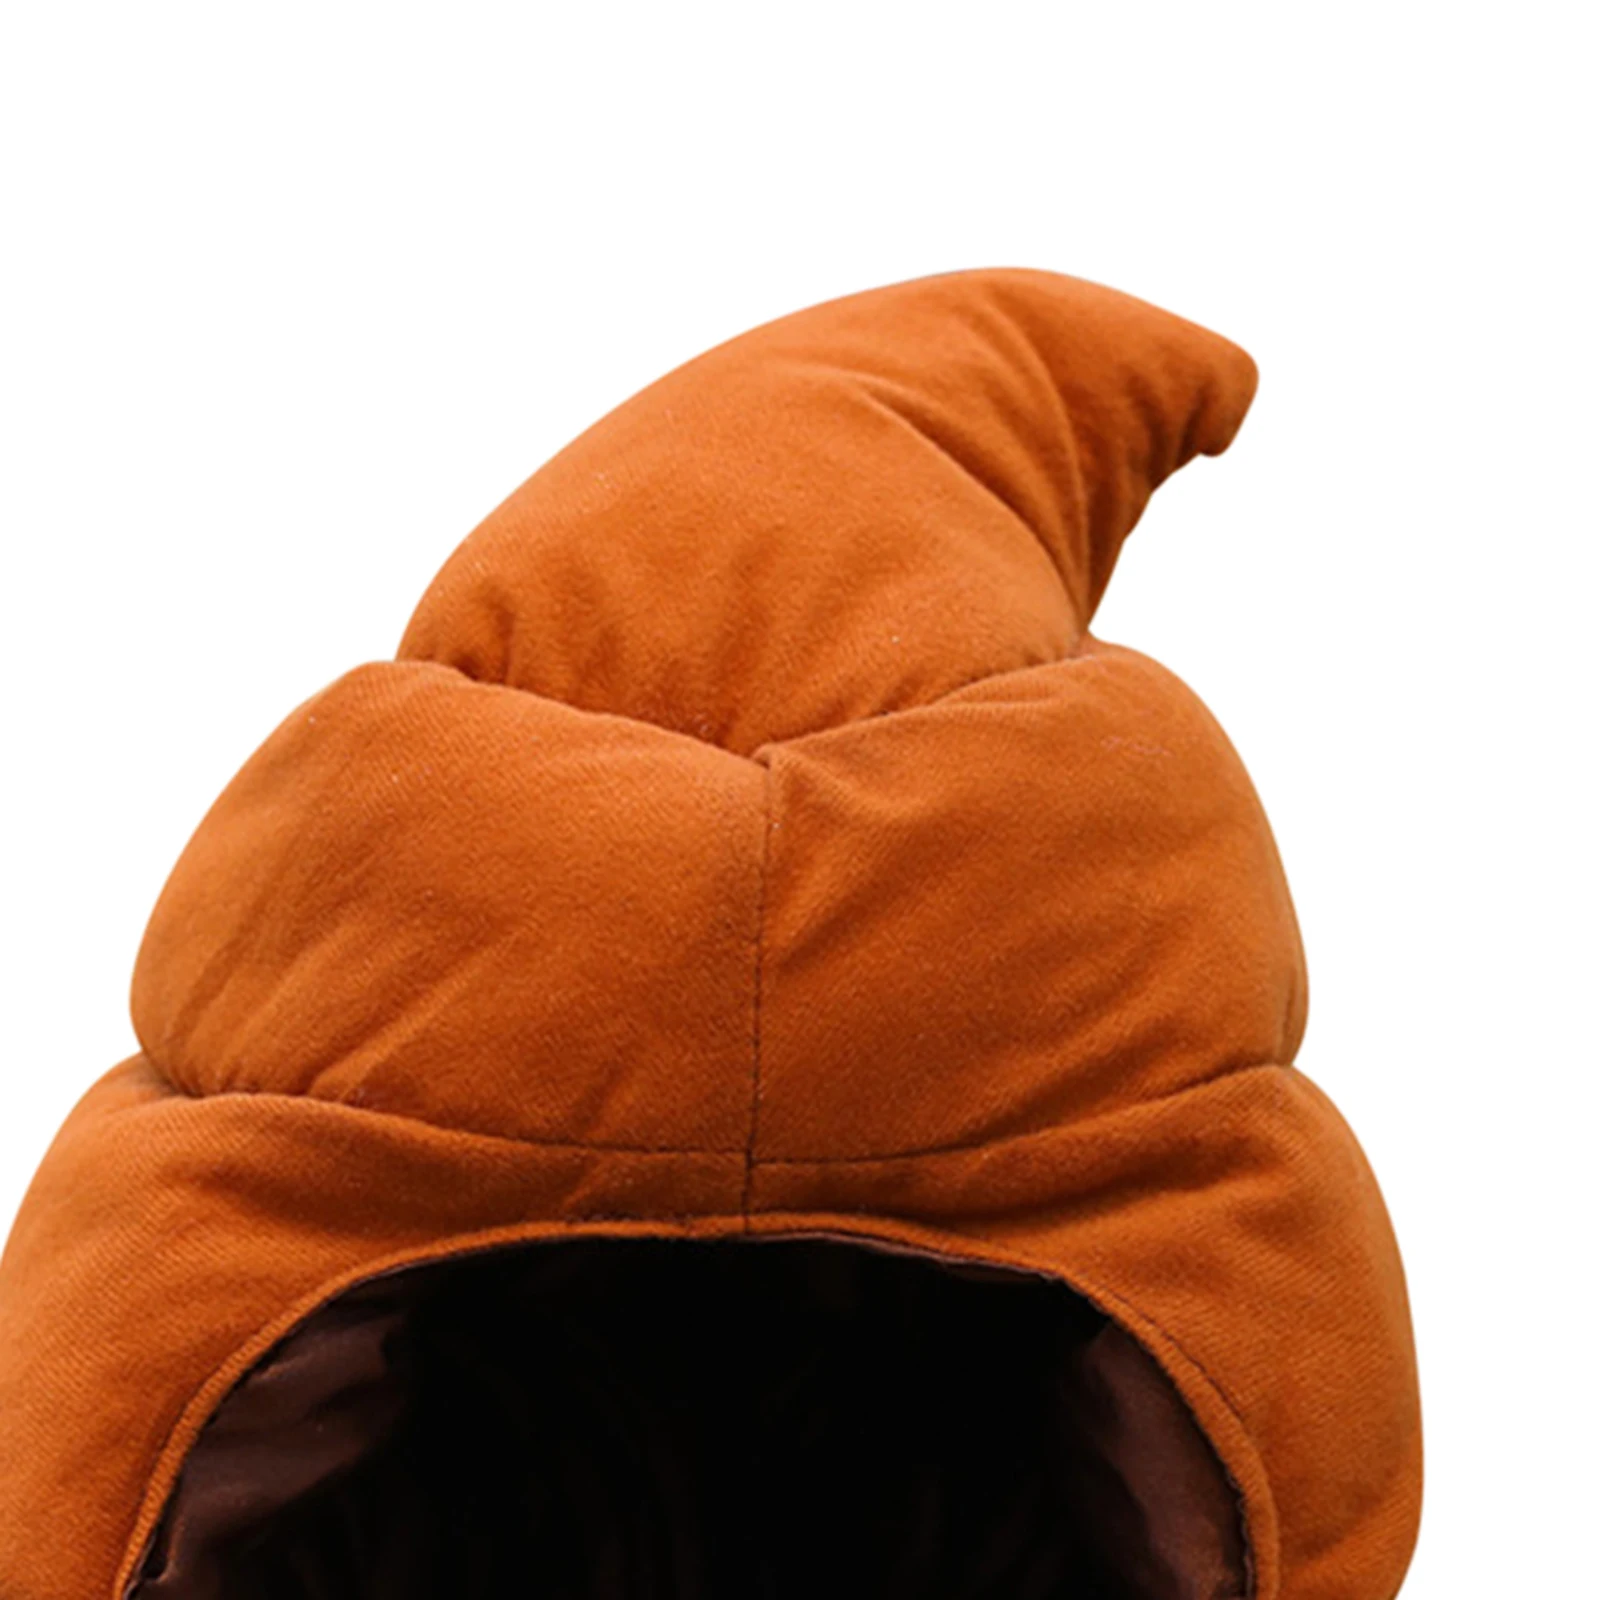 Cute Fake Poop Hat Beanie Cosplay Costume Halloween Plush Cap Photographing Props Accessories Stage Performance Head Bands